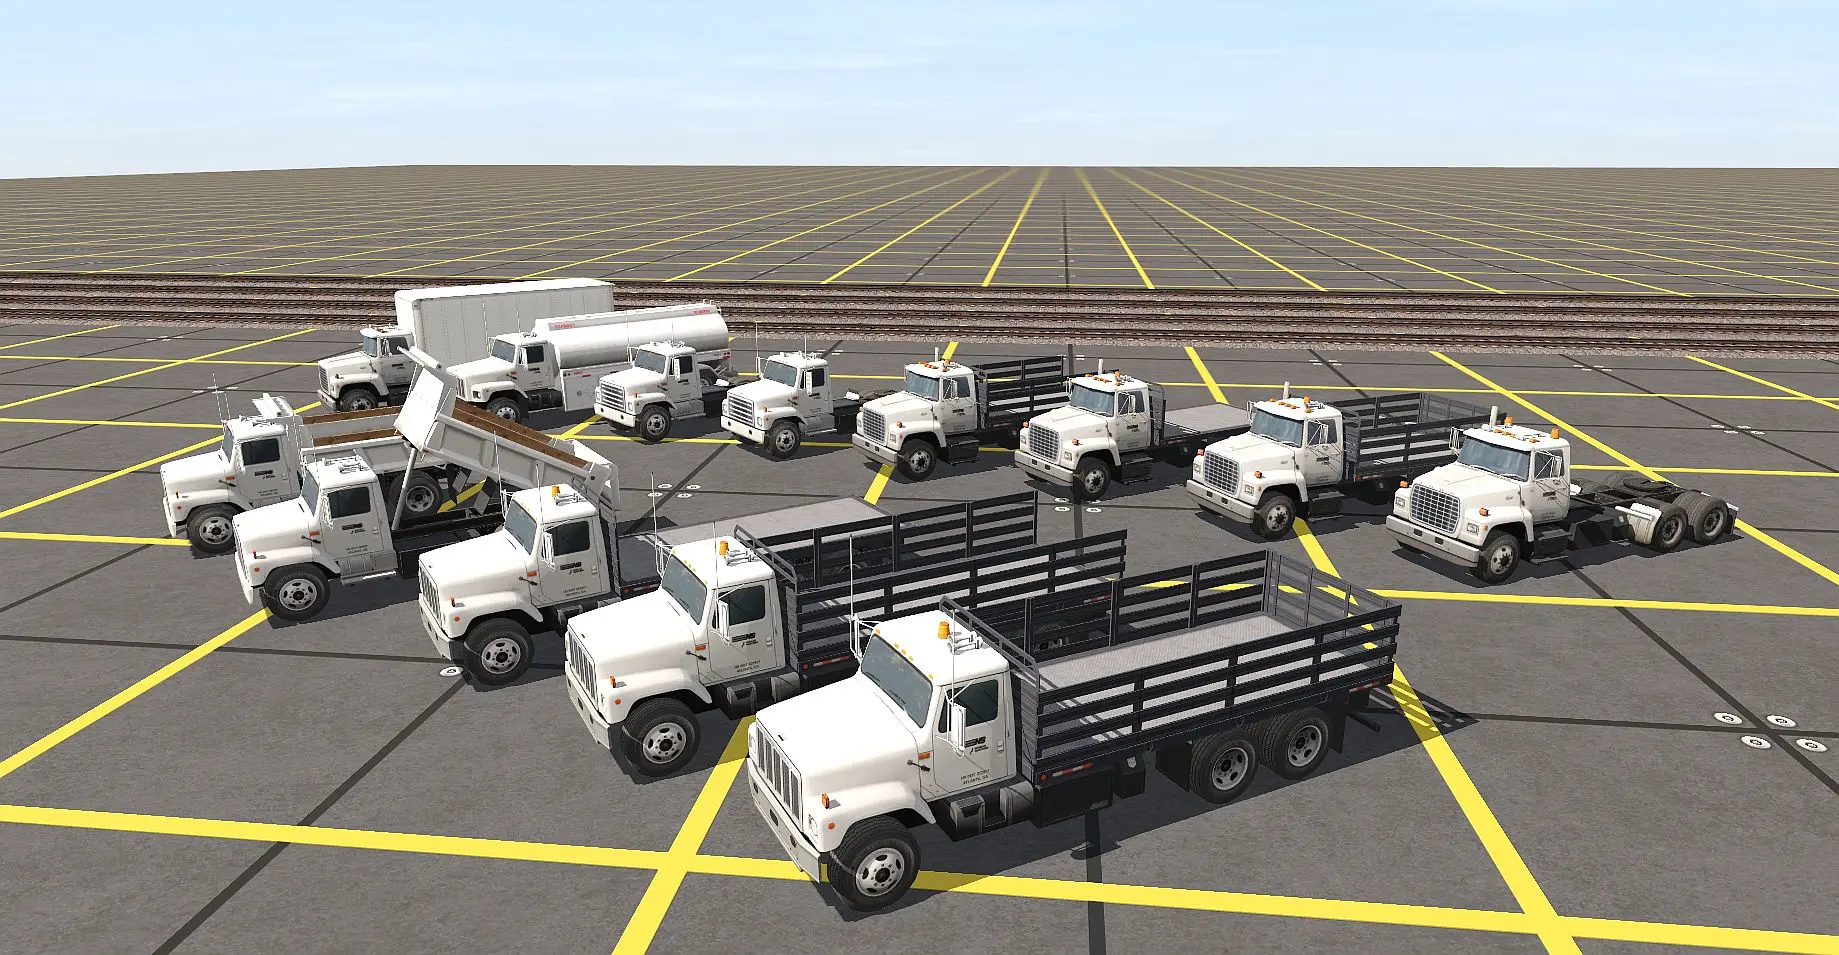 A Set of Trucks Placed on the Ground Image